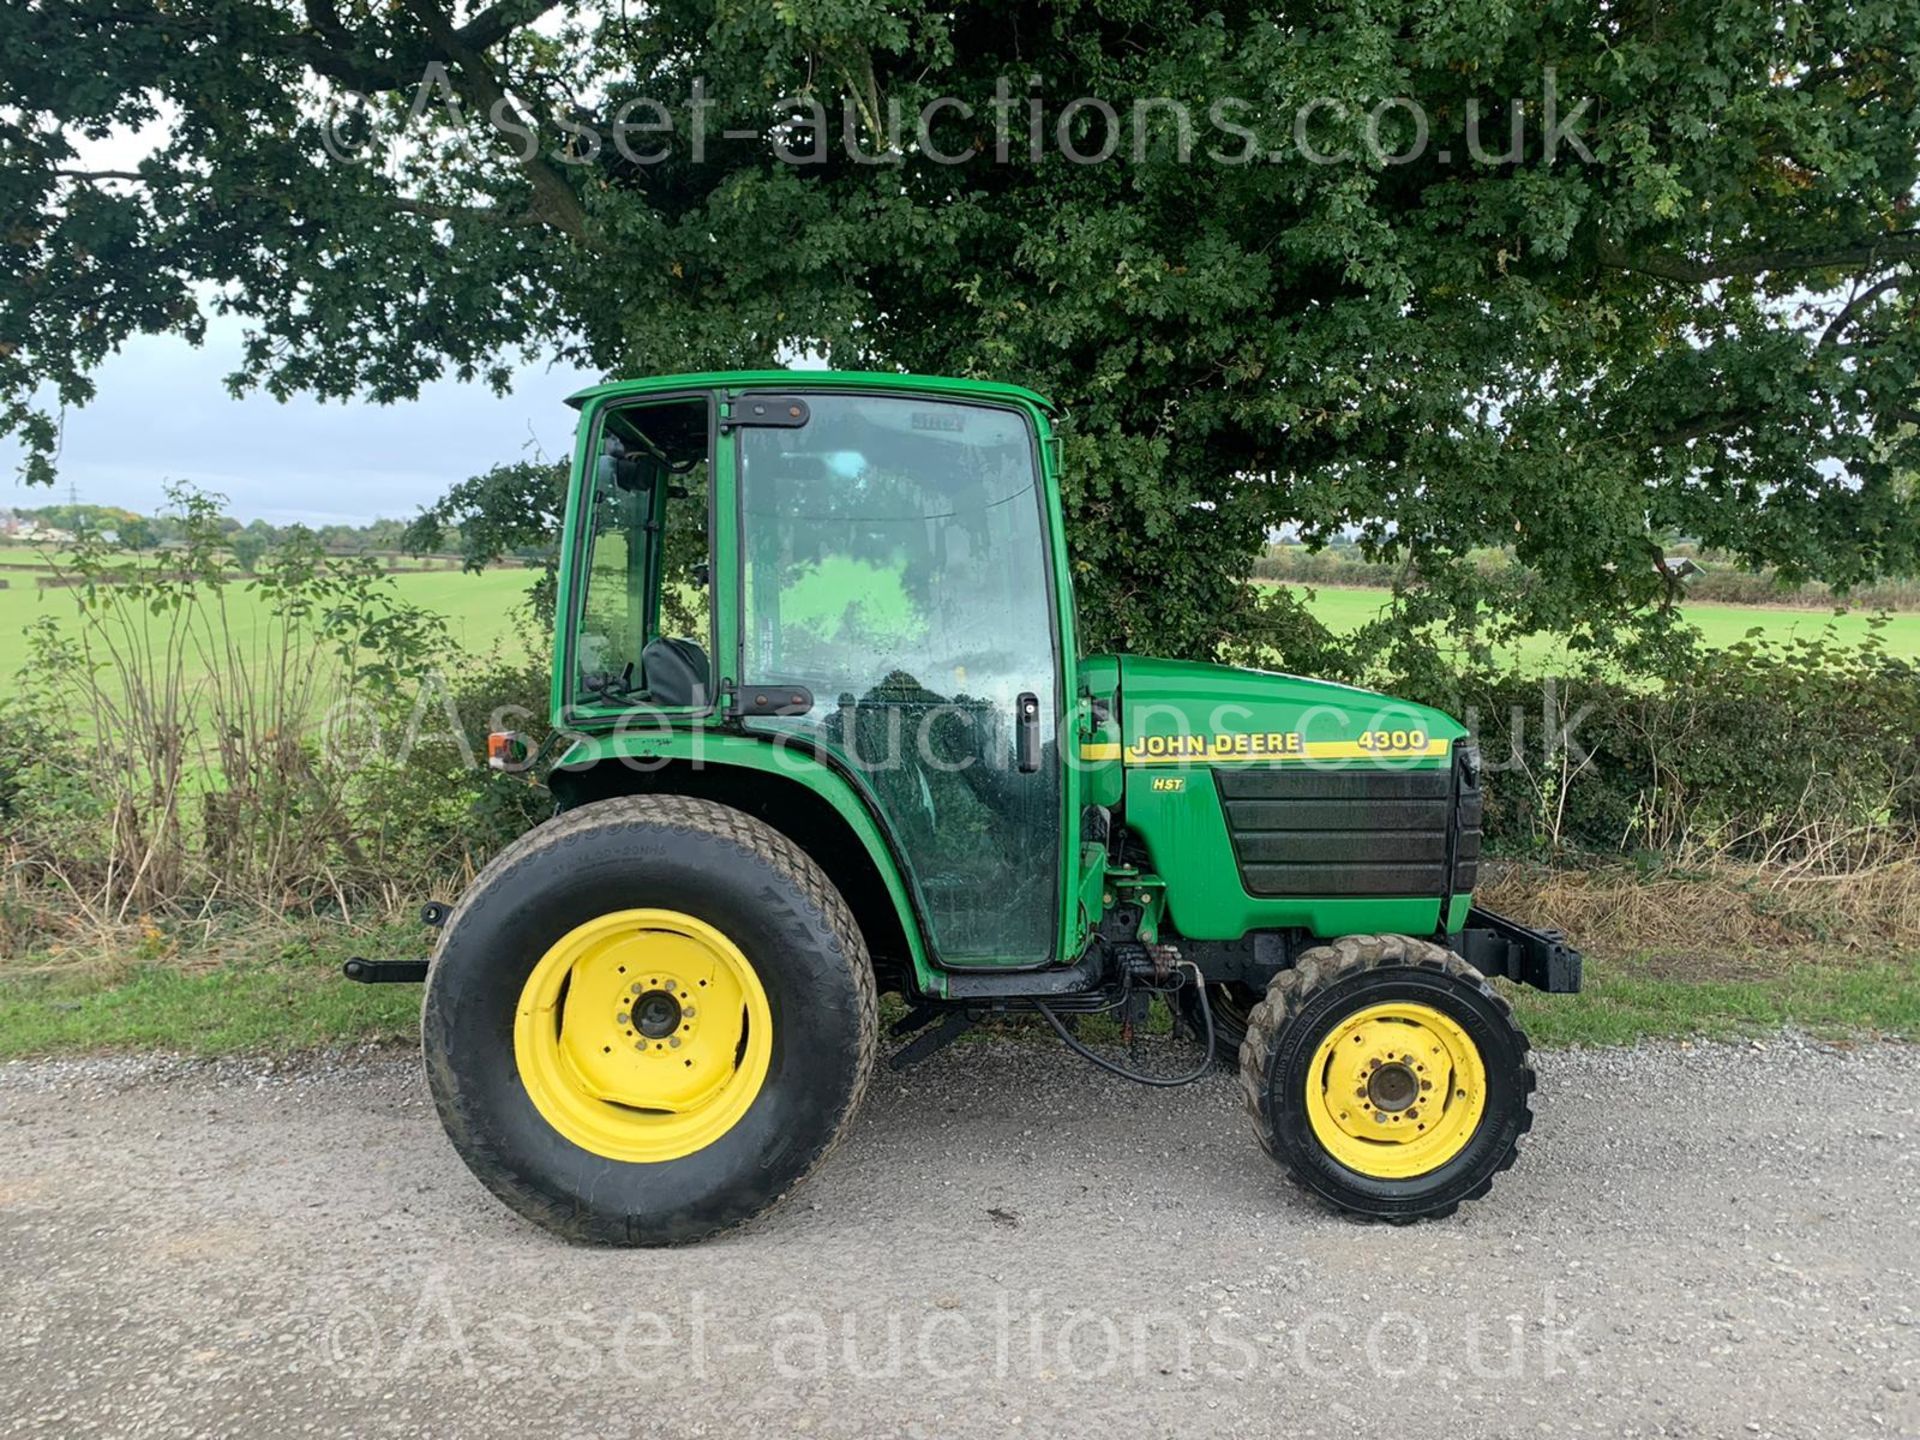 JOHN DEERE 4300 32hp 4WD COMPACT TRACTOR, RUNS DRIVES AND WORKS, CABBED, REAR TOW, ROAD KIT